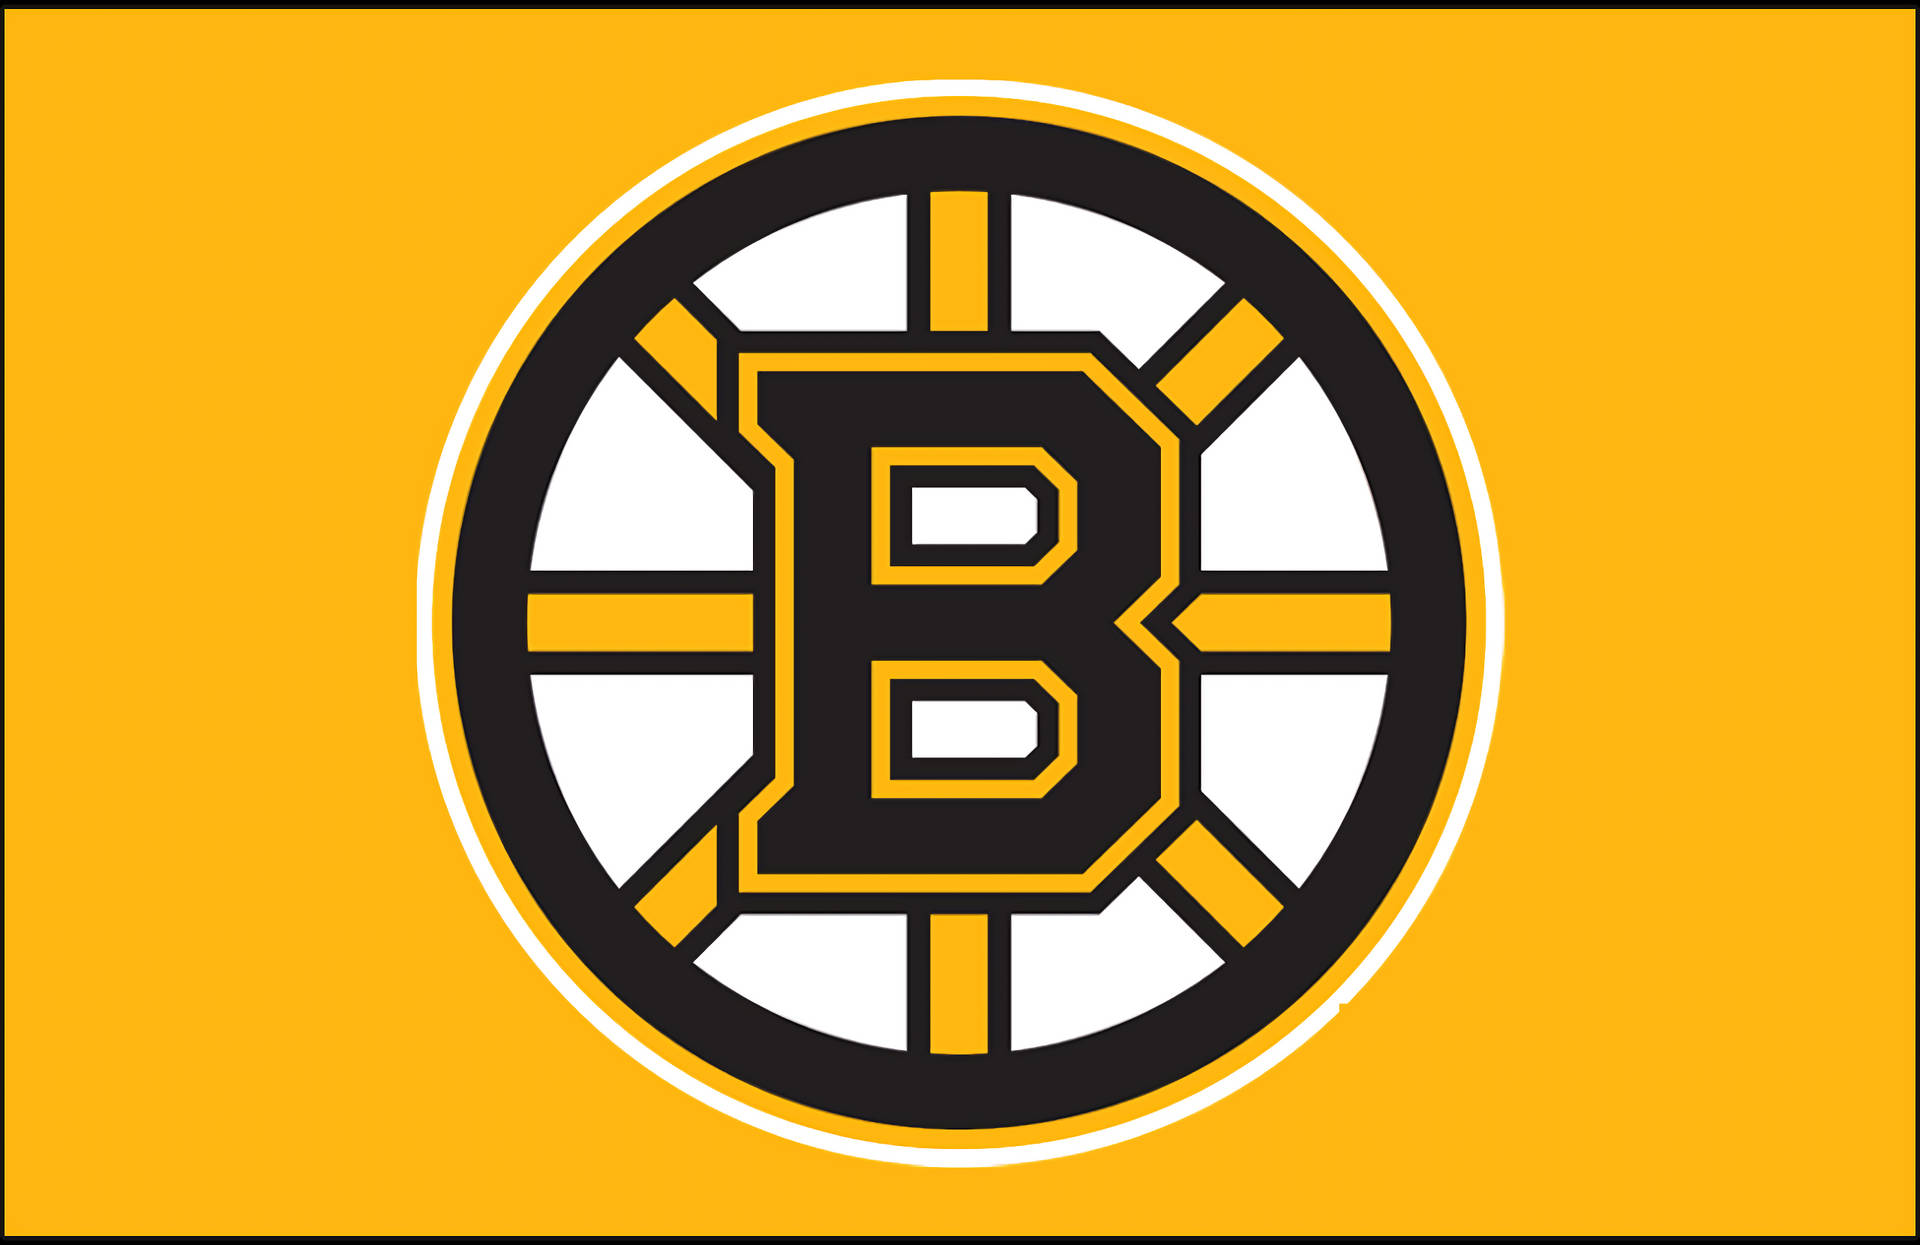 Boston Bruins Iconic Logo on a Yellow Background Wallpaper